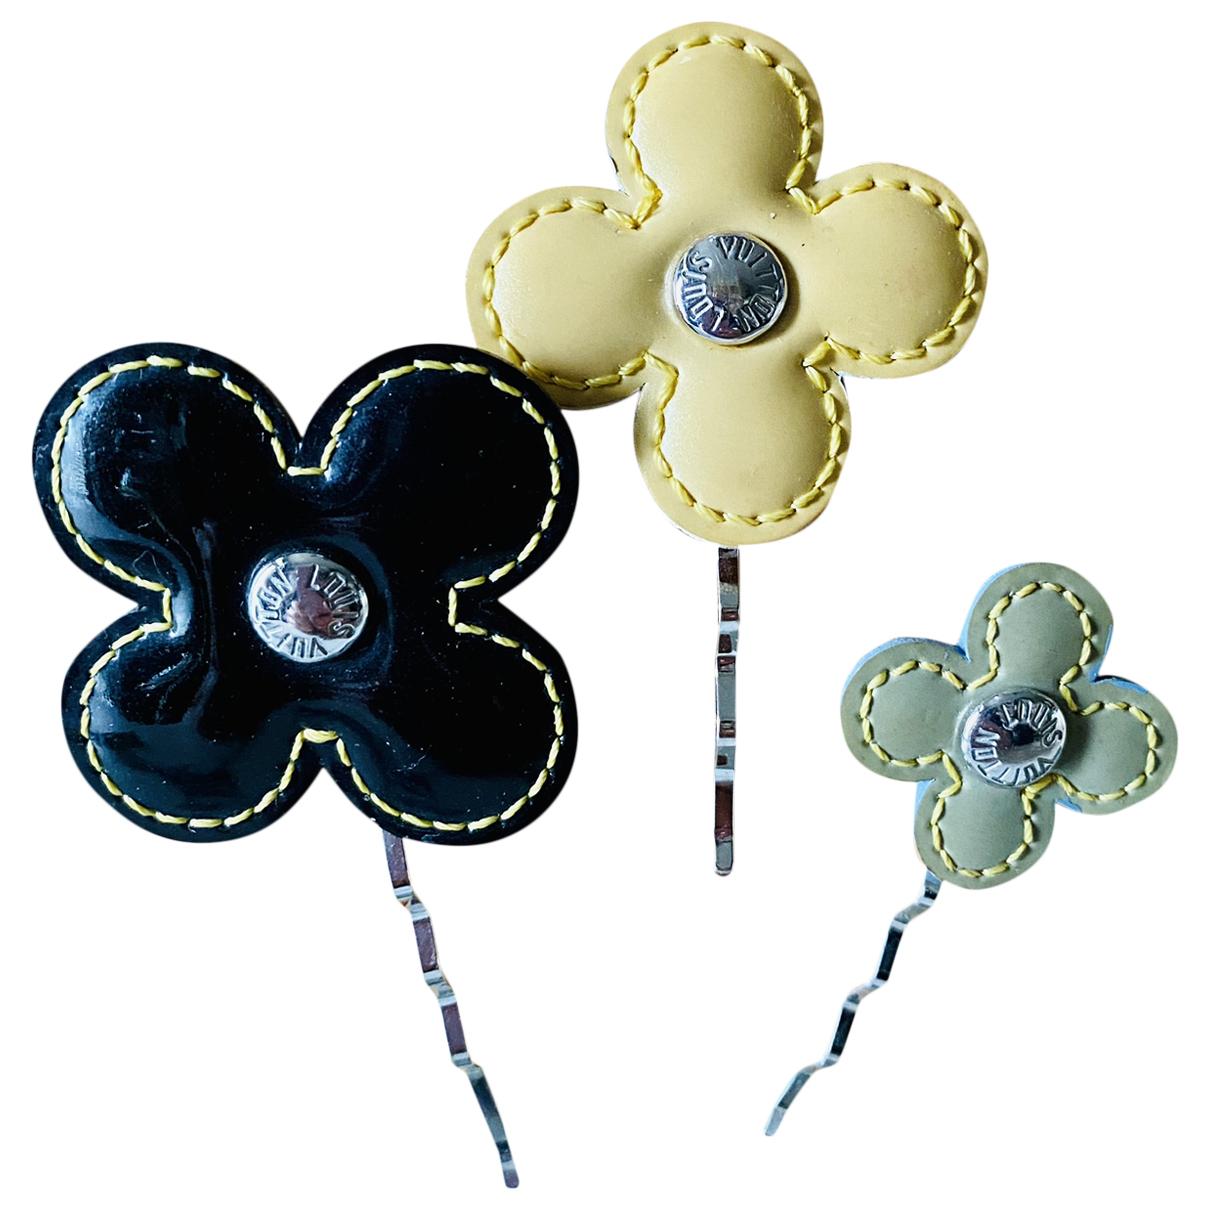 Flore leather hair accessory